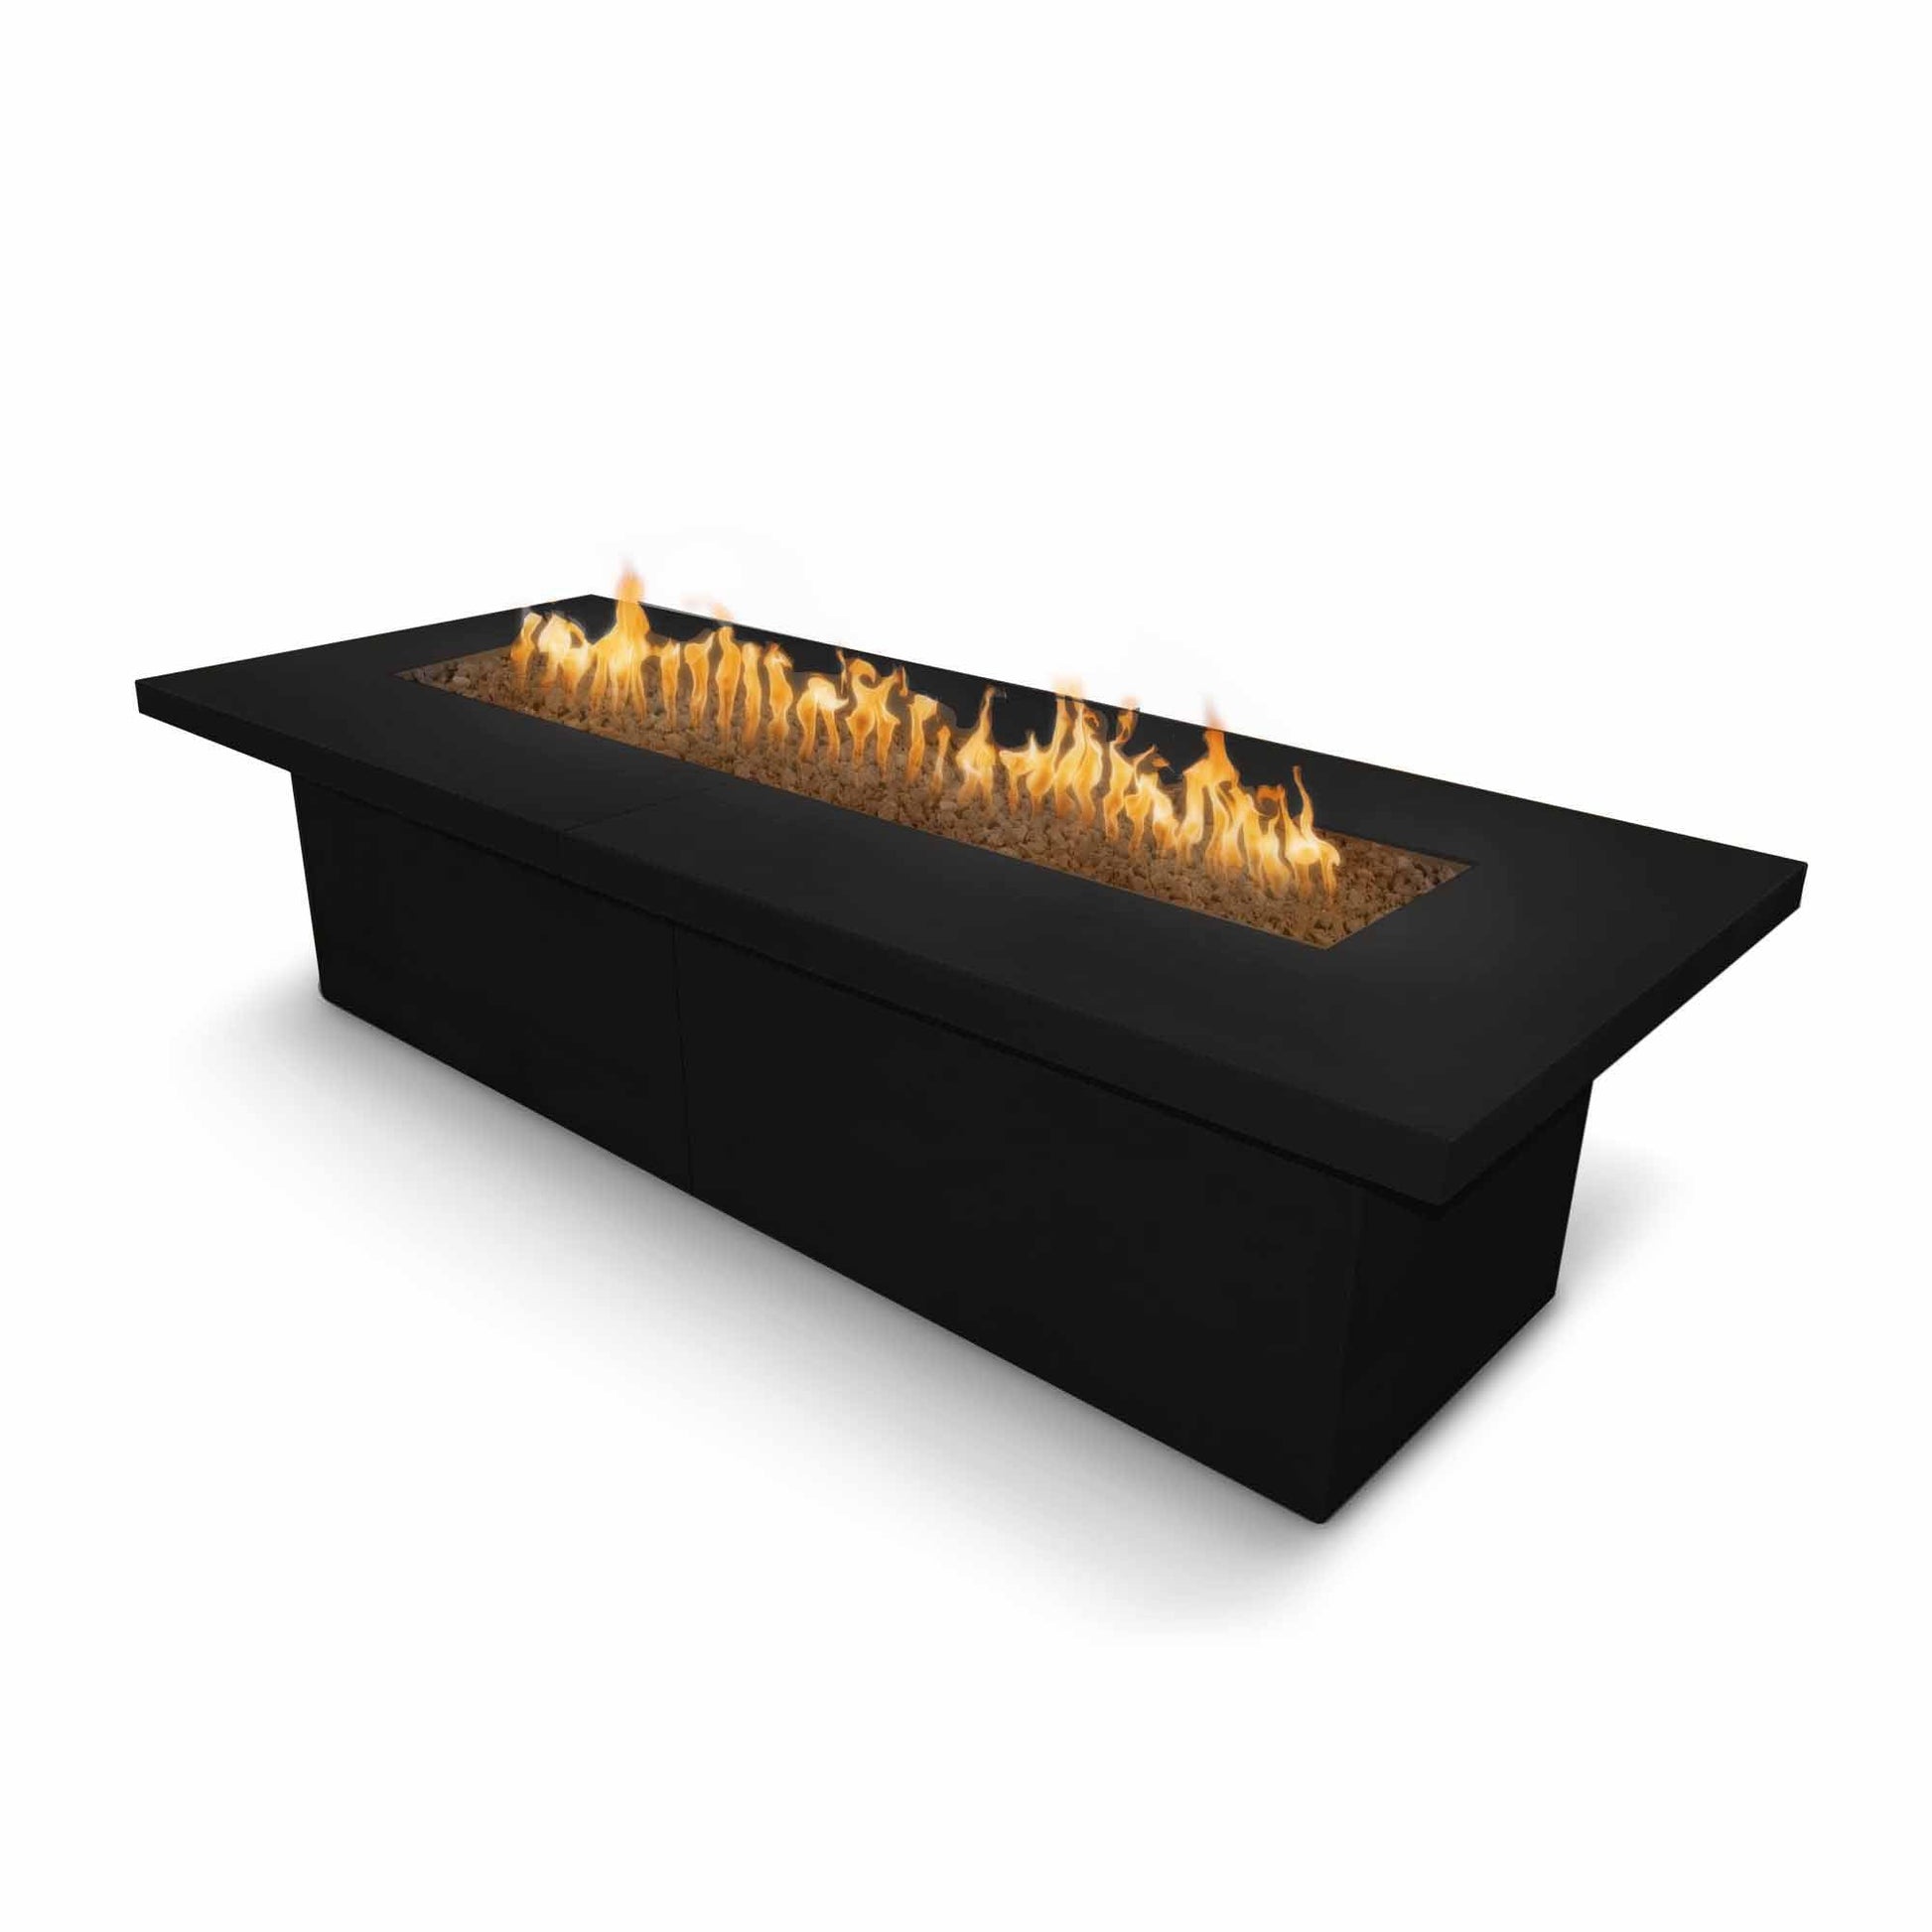 The Outdoor Plus Rectangular Newport 72" Stainless Steel Natural Gas Fire Pit with Flame Sense with Spark Ignition